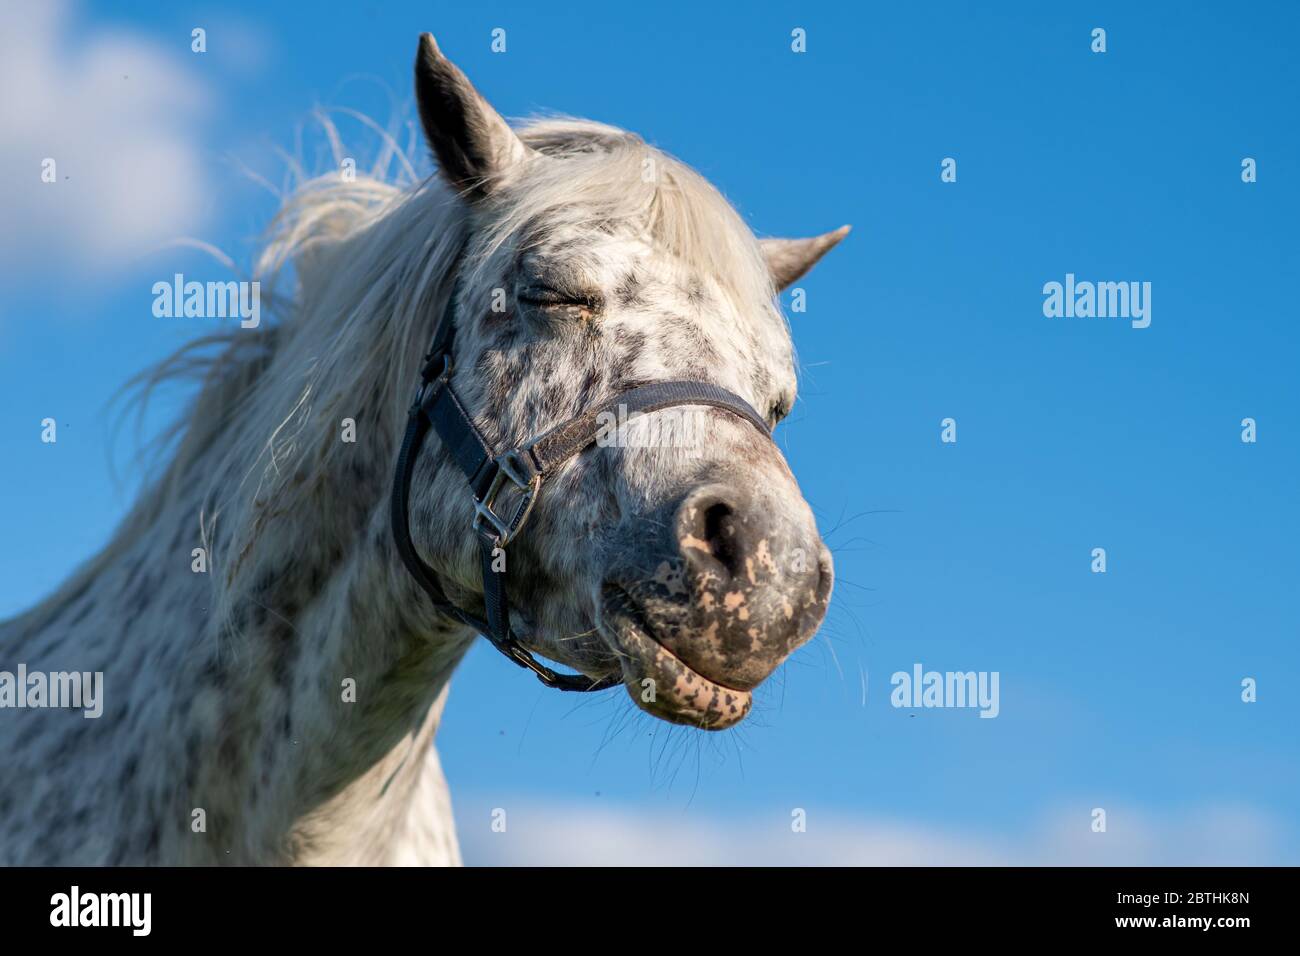 A close up portrait of a funny horse face smiling  bright blue sky background Stock Photo